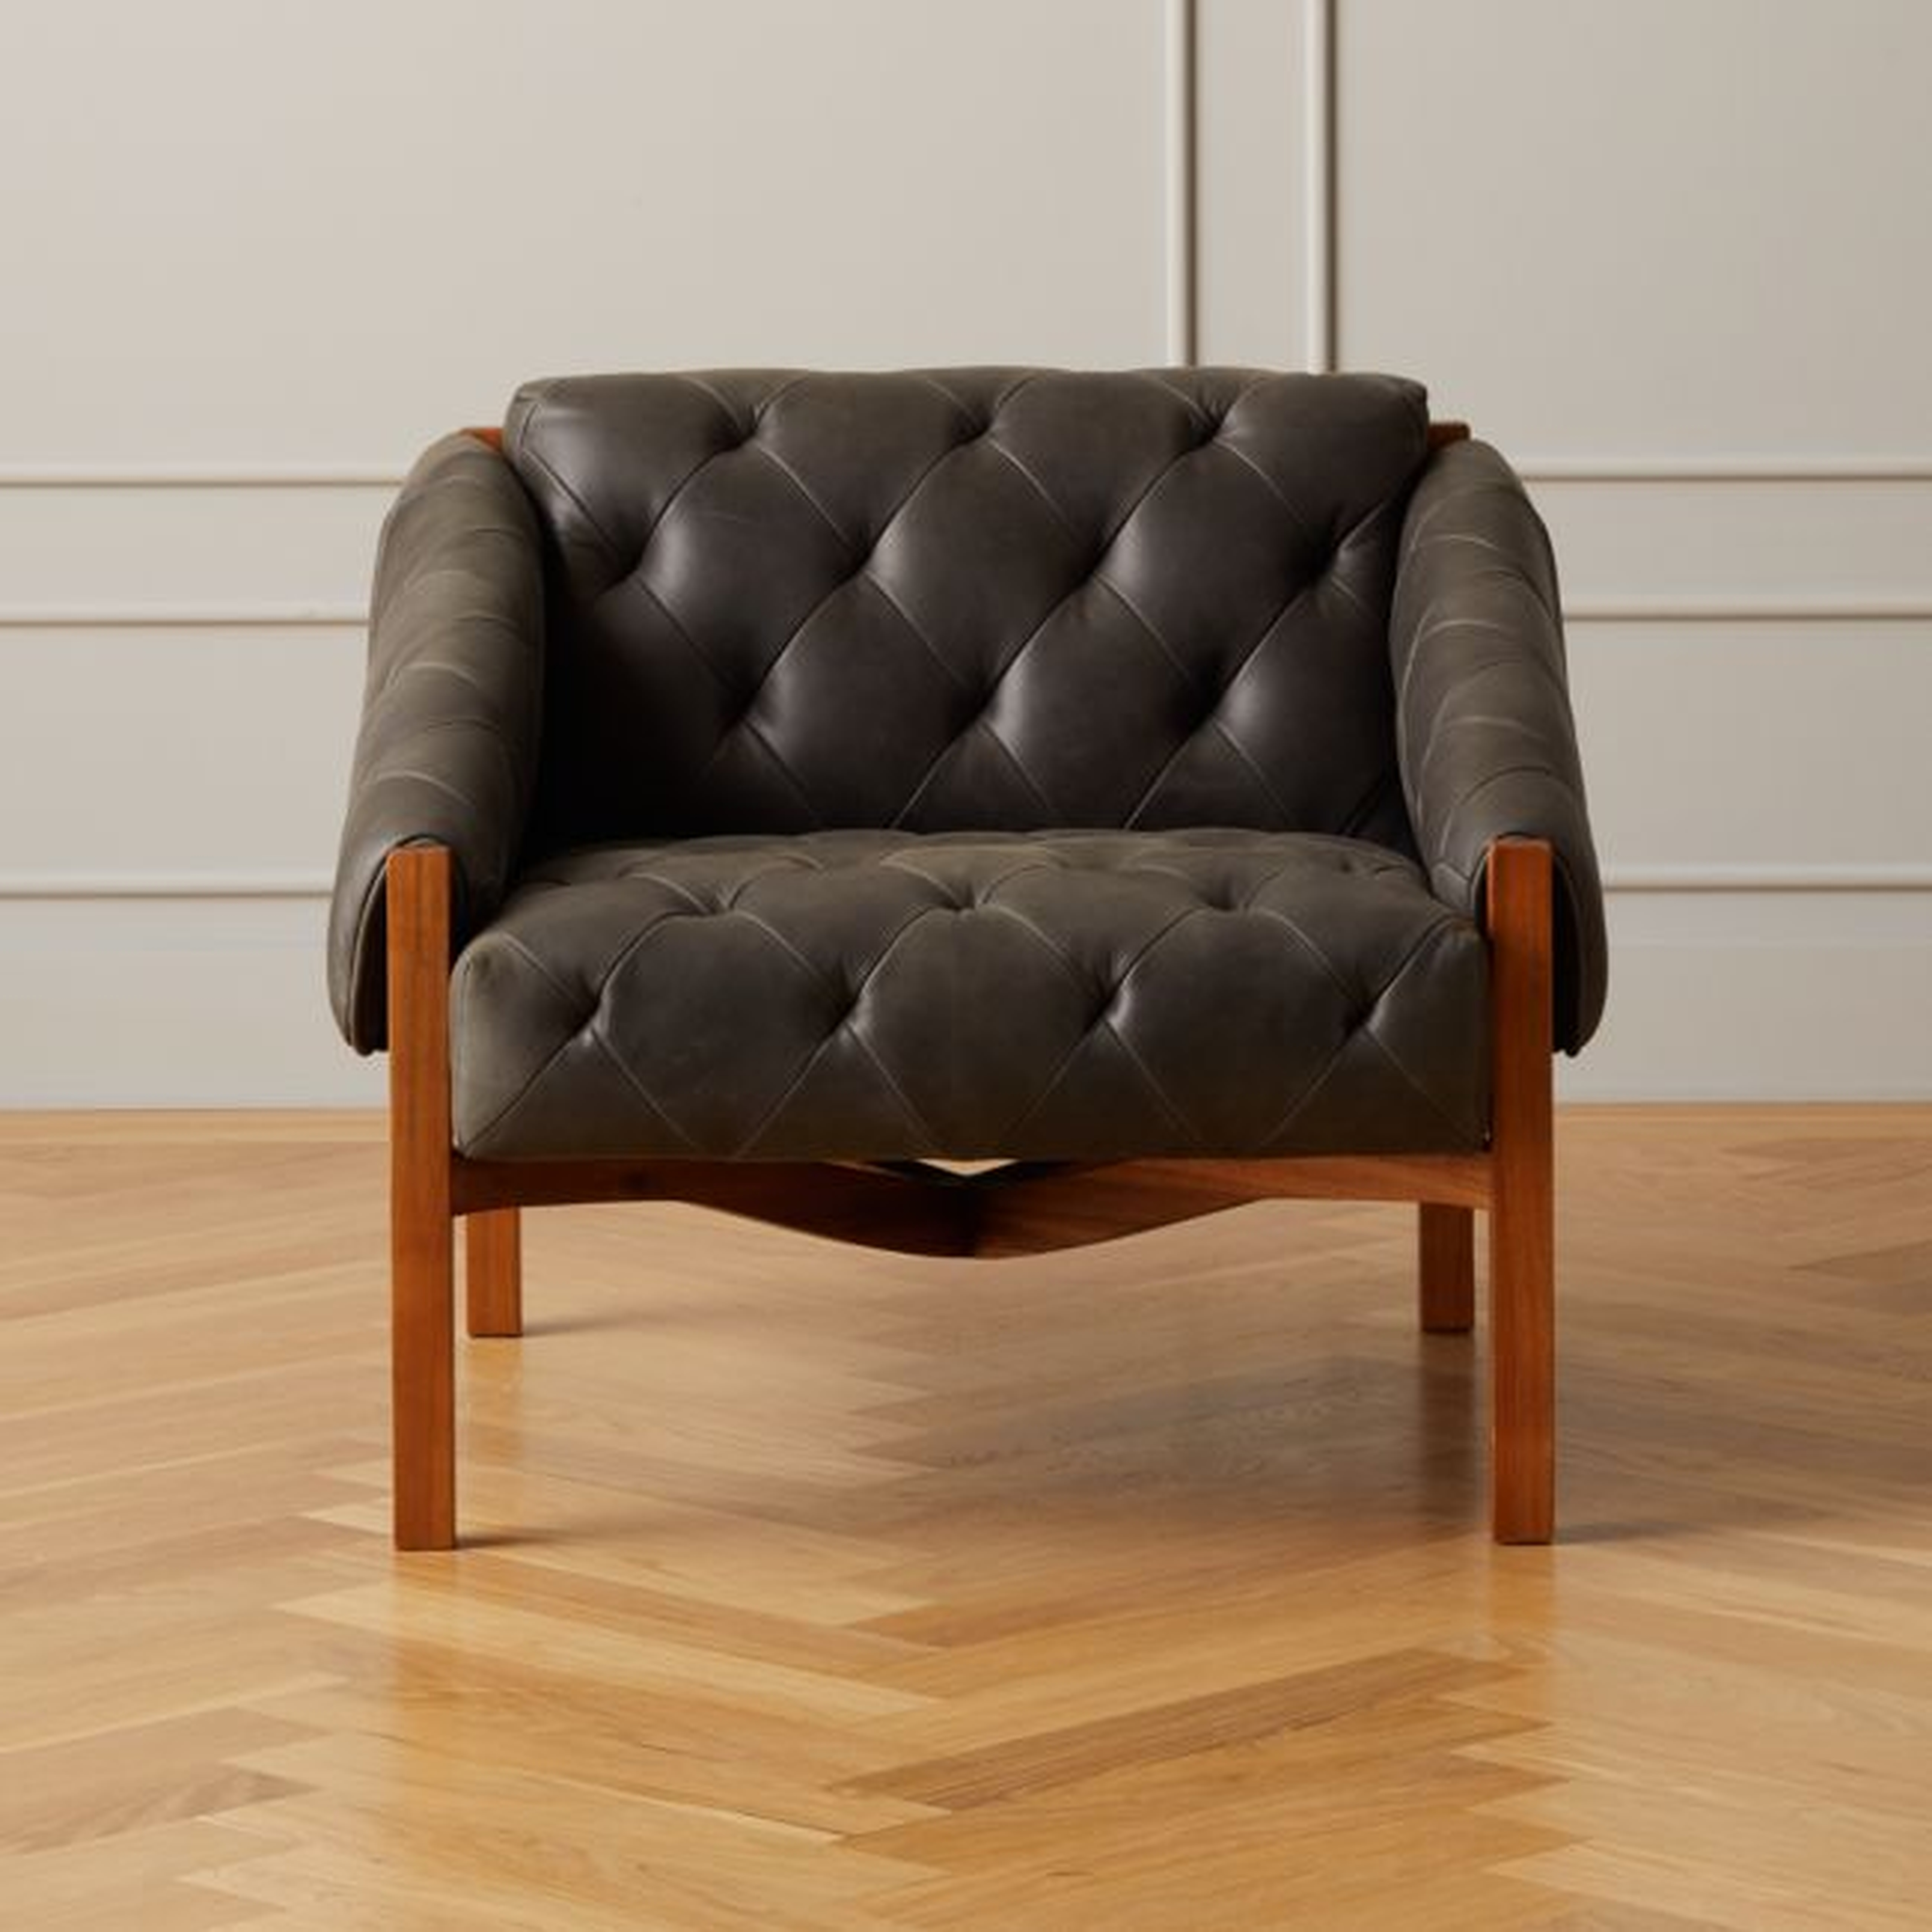 Abruzzo Charcoal Leather Tufted Chair - CB2